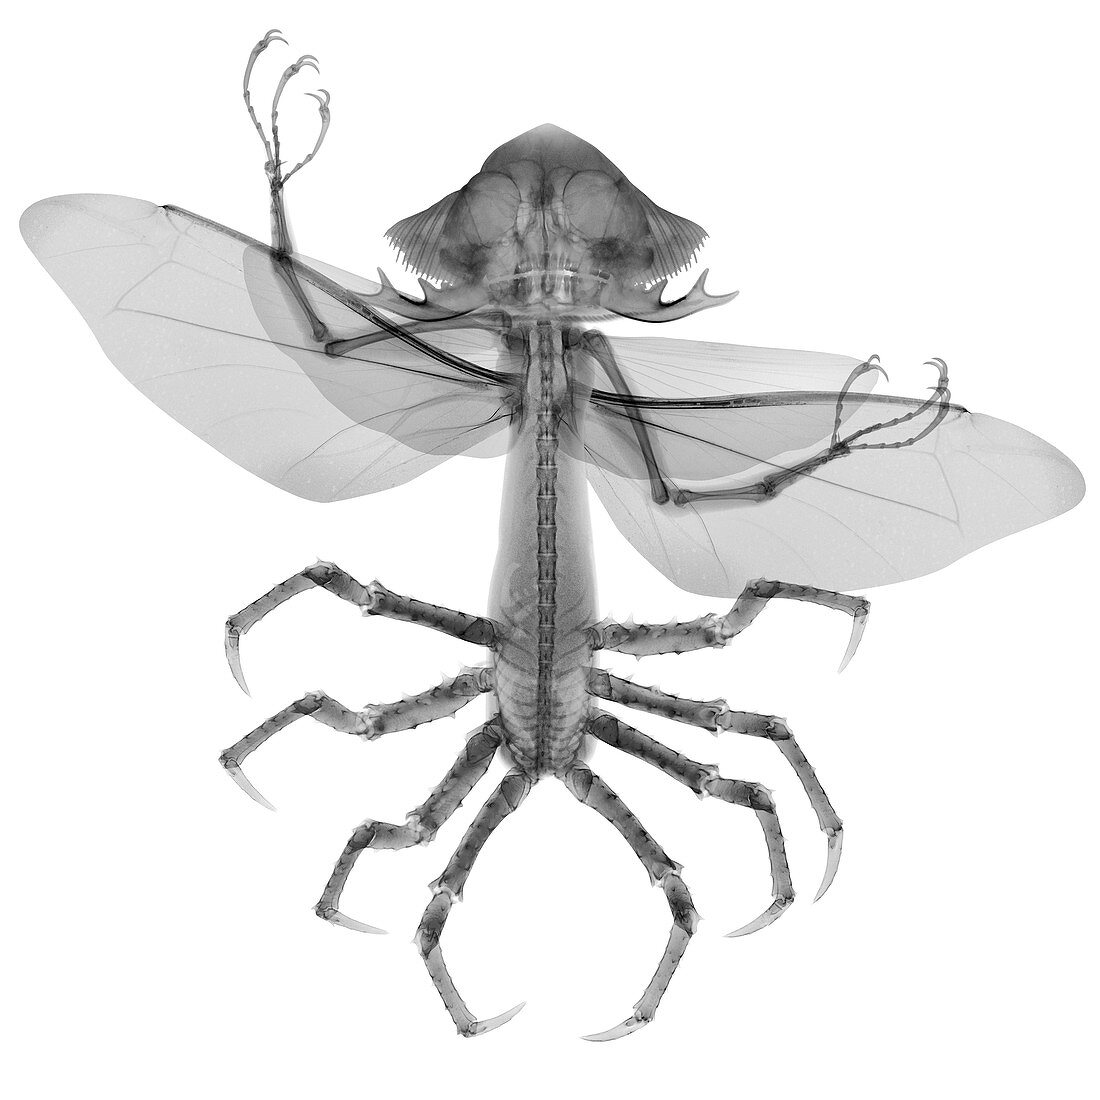 Alien insect hybrid, X-ray